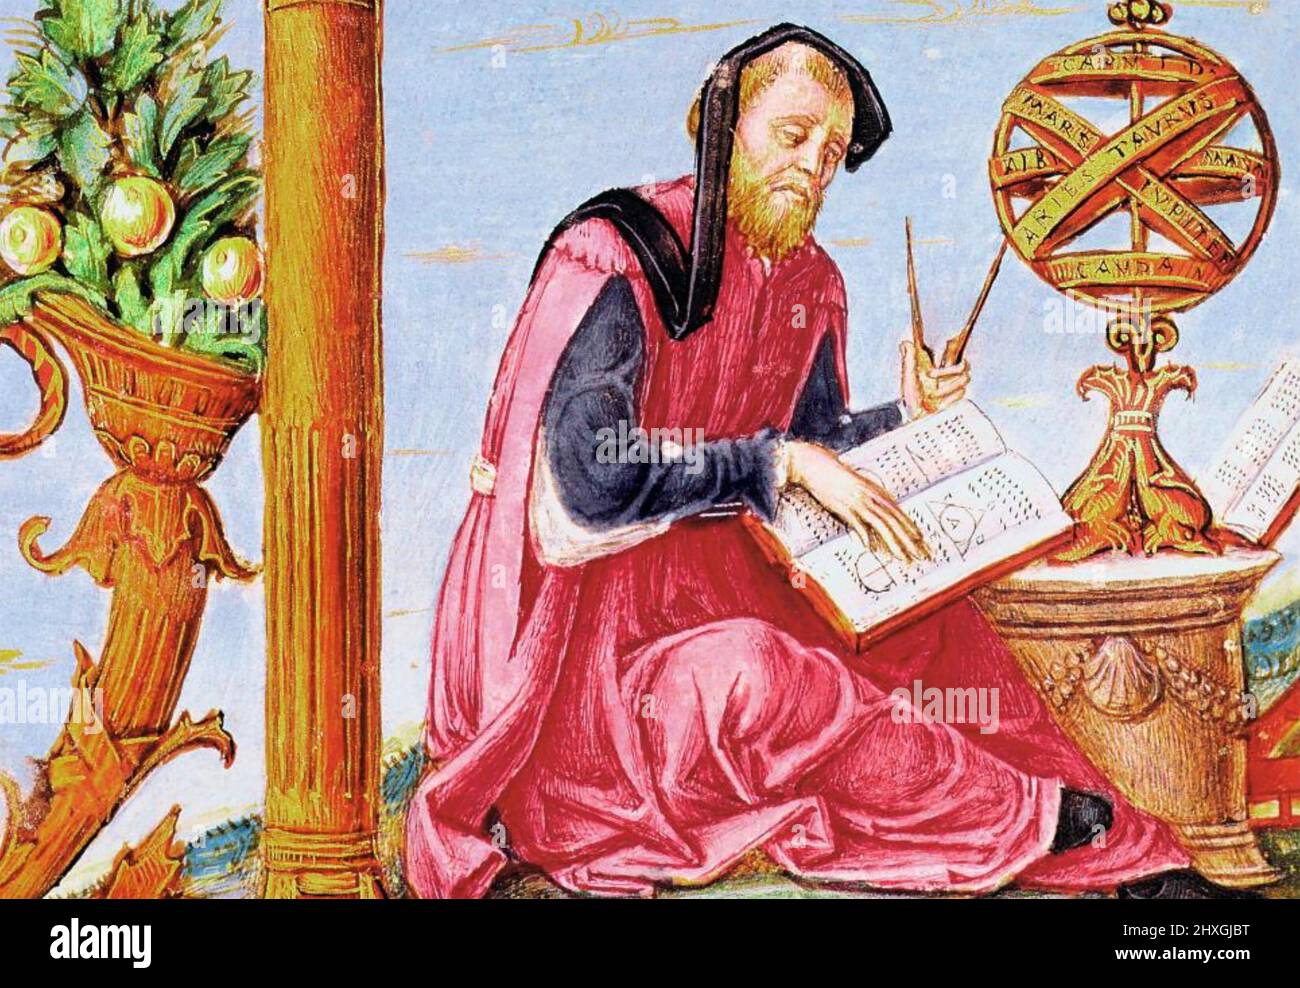 PLINY THE ELDER (AD 23-79)  Roman author and naturalist as shown in a Medieval edition of his encyclopaedia Naturalis Historia Stock Photo